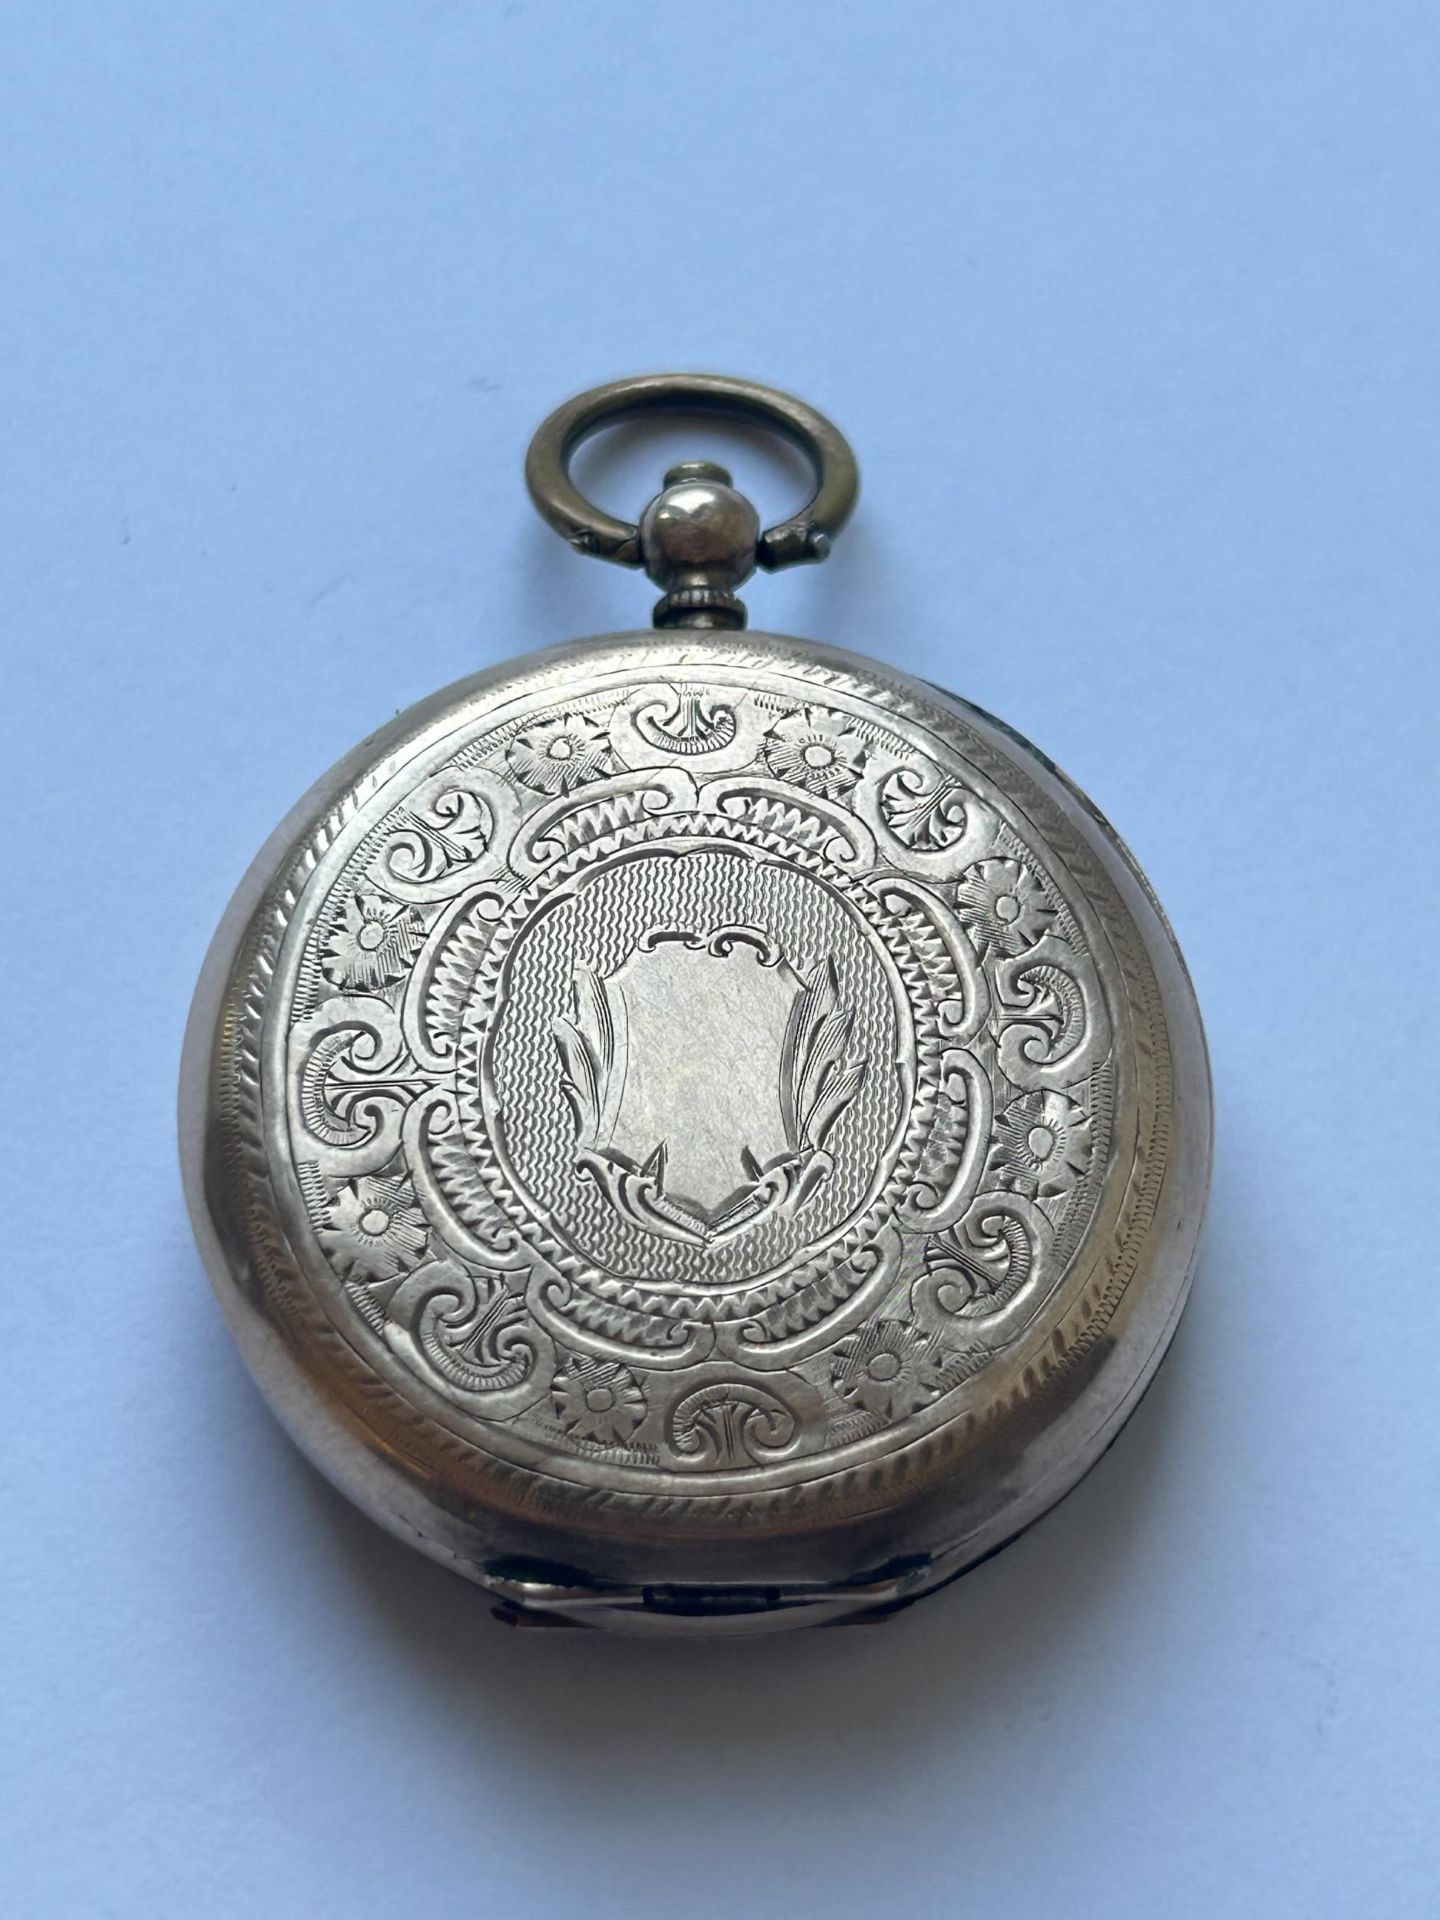 A 9CT GOLD LADIES OPEN FACED POCKET WATCH GROSS WEIGHT 30.63 GRAMS - Image 3 of 6